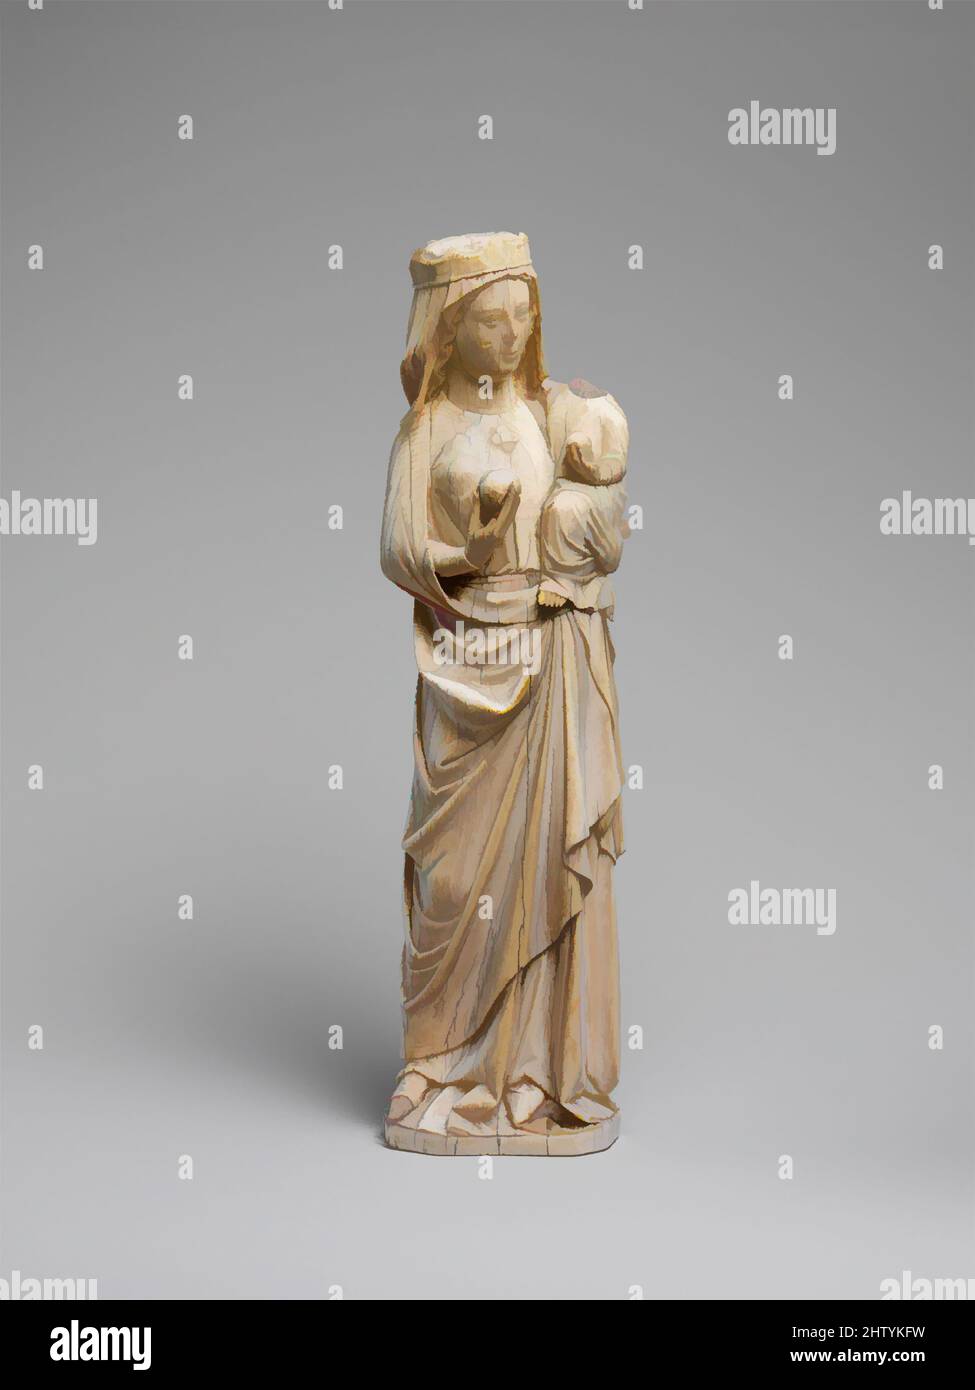 Art inspired by Virgin and Child, ca. 1250–1300, North French, Ivory, Overall: 11 3/4 x 3 5/16 x 2 1/16 in. (29.8 x 8.4 x 5.2 cm), Ivories, The many devotional images of the Virgin—to be found in every medium—reflect the belief in her ability to comfort, to intercede, and to nurture, Classic works modernized by Artotop with a splash of modernity. Shapes, color and value, eye-catching visual impact on art. Emotions through freedom of artworks in a contemporary way. A timeless message pursuing a wildly creative new direction. Artists turning to the digital medium and creating the Artotop NFT Stock Photo